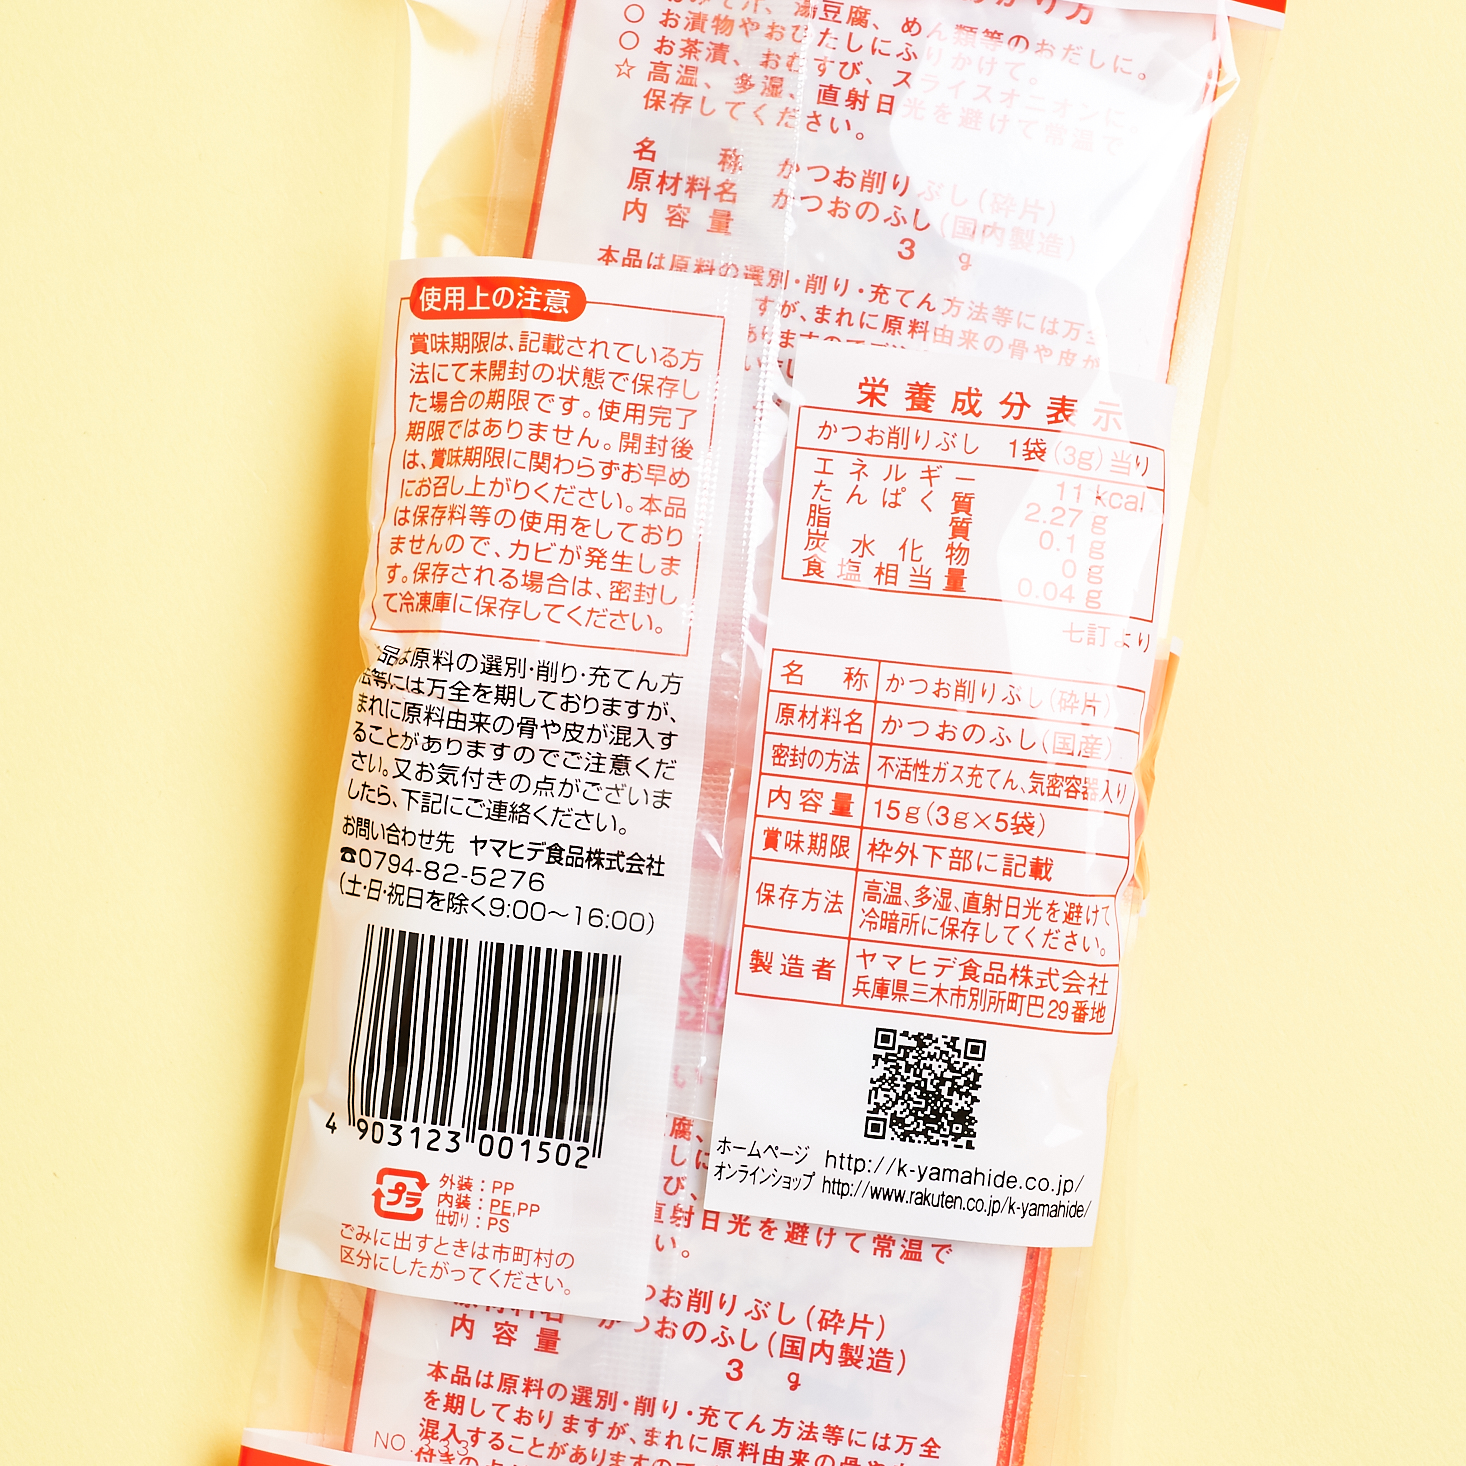 bonus item bonito flakes packaging, pictured from the back